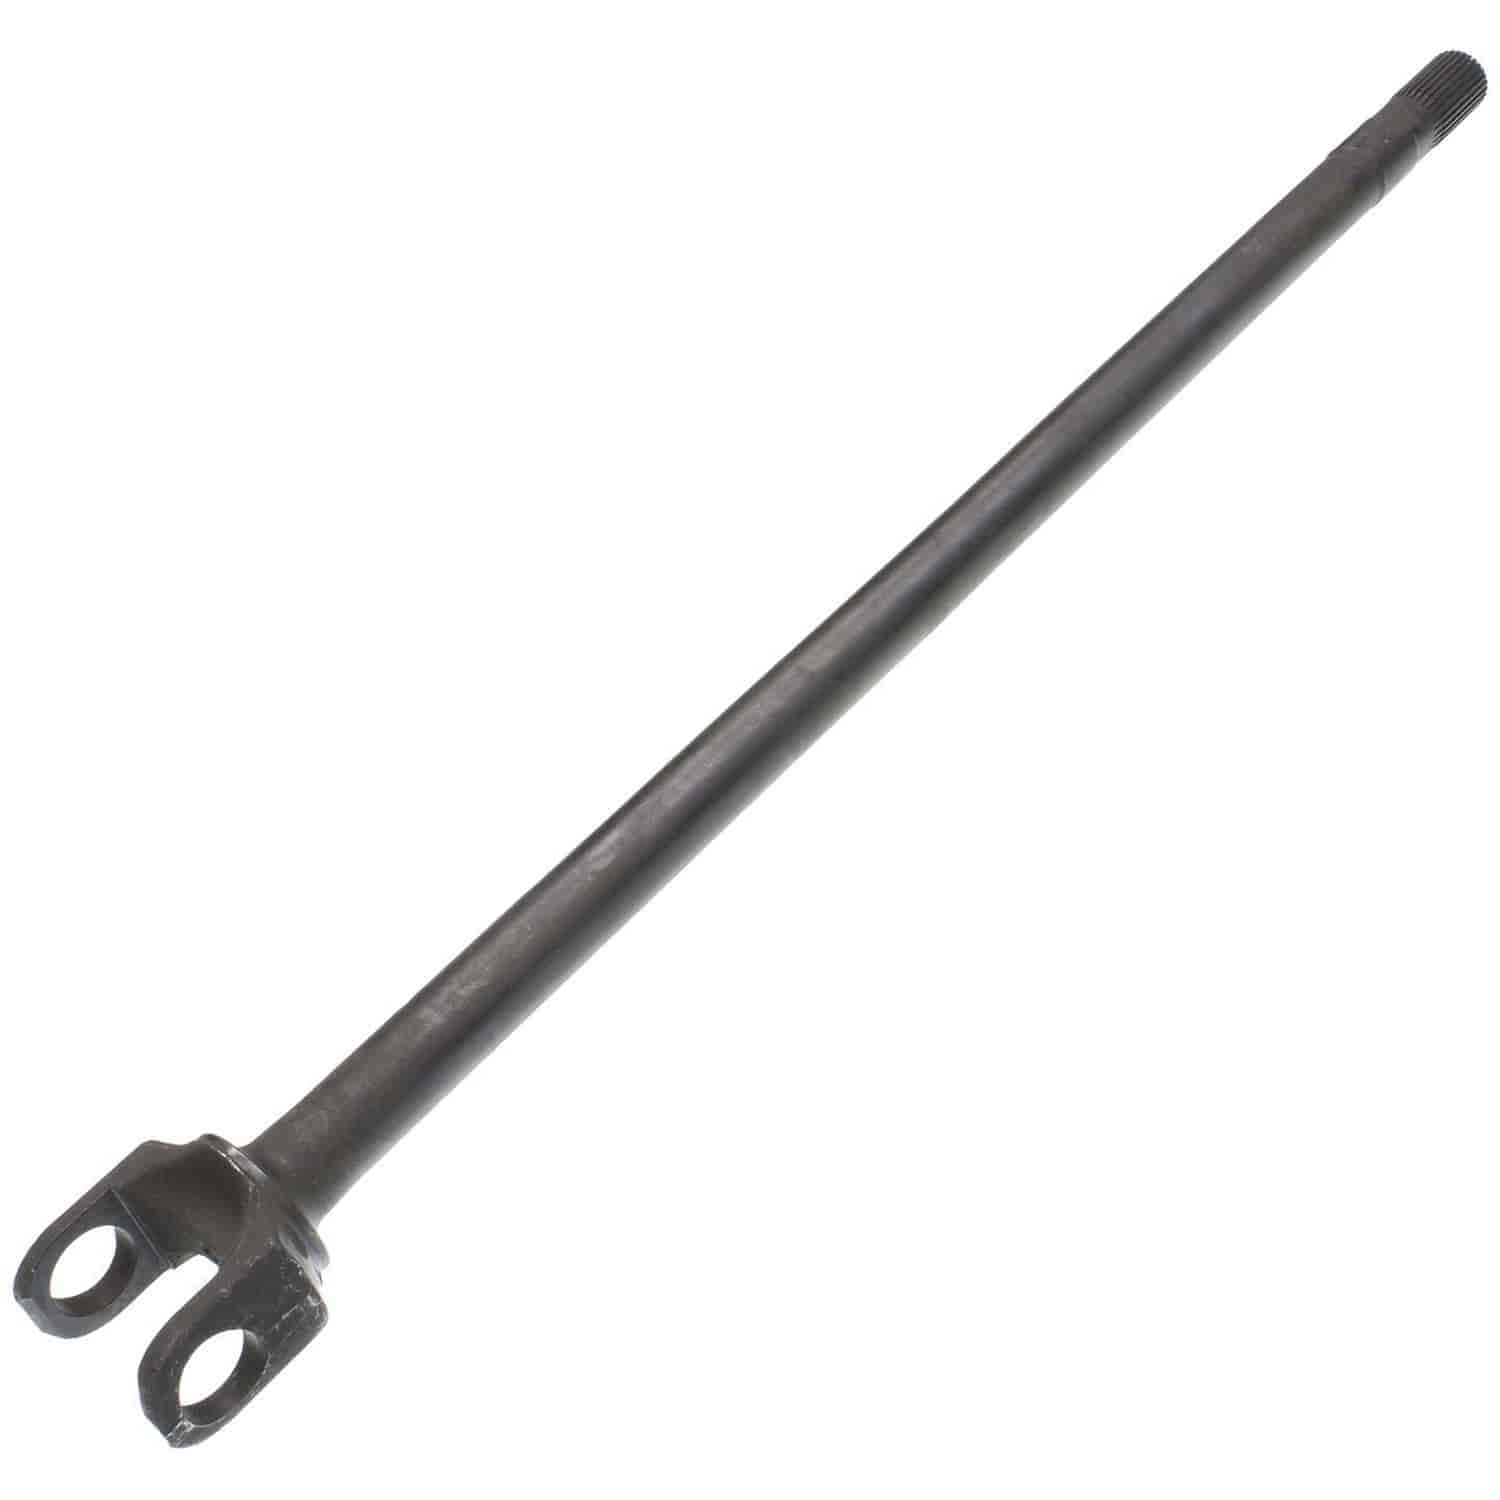 Axle Shaft 32.91 in. Overall Length 30 Spline Black Oxide Badged Under The Ten Factory Product Line